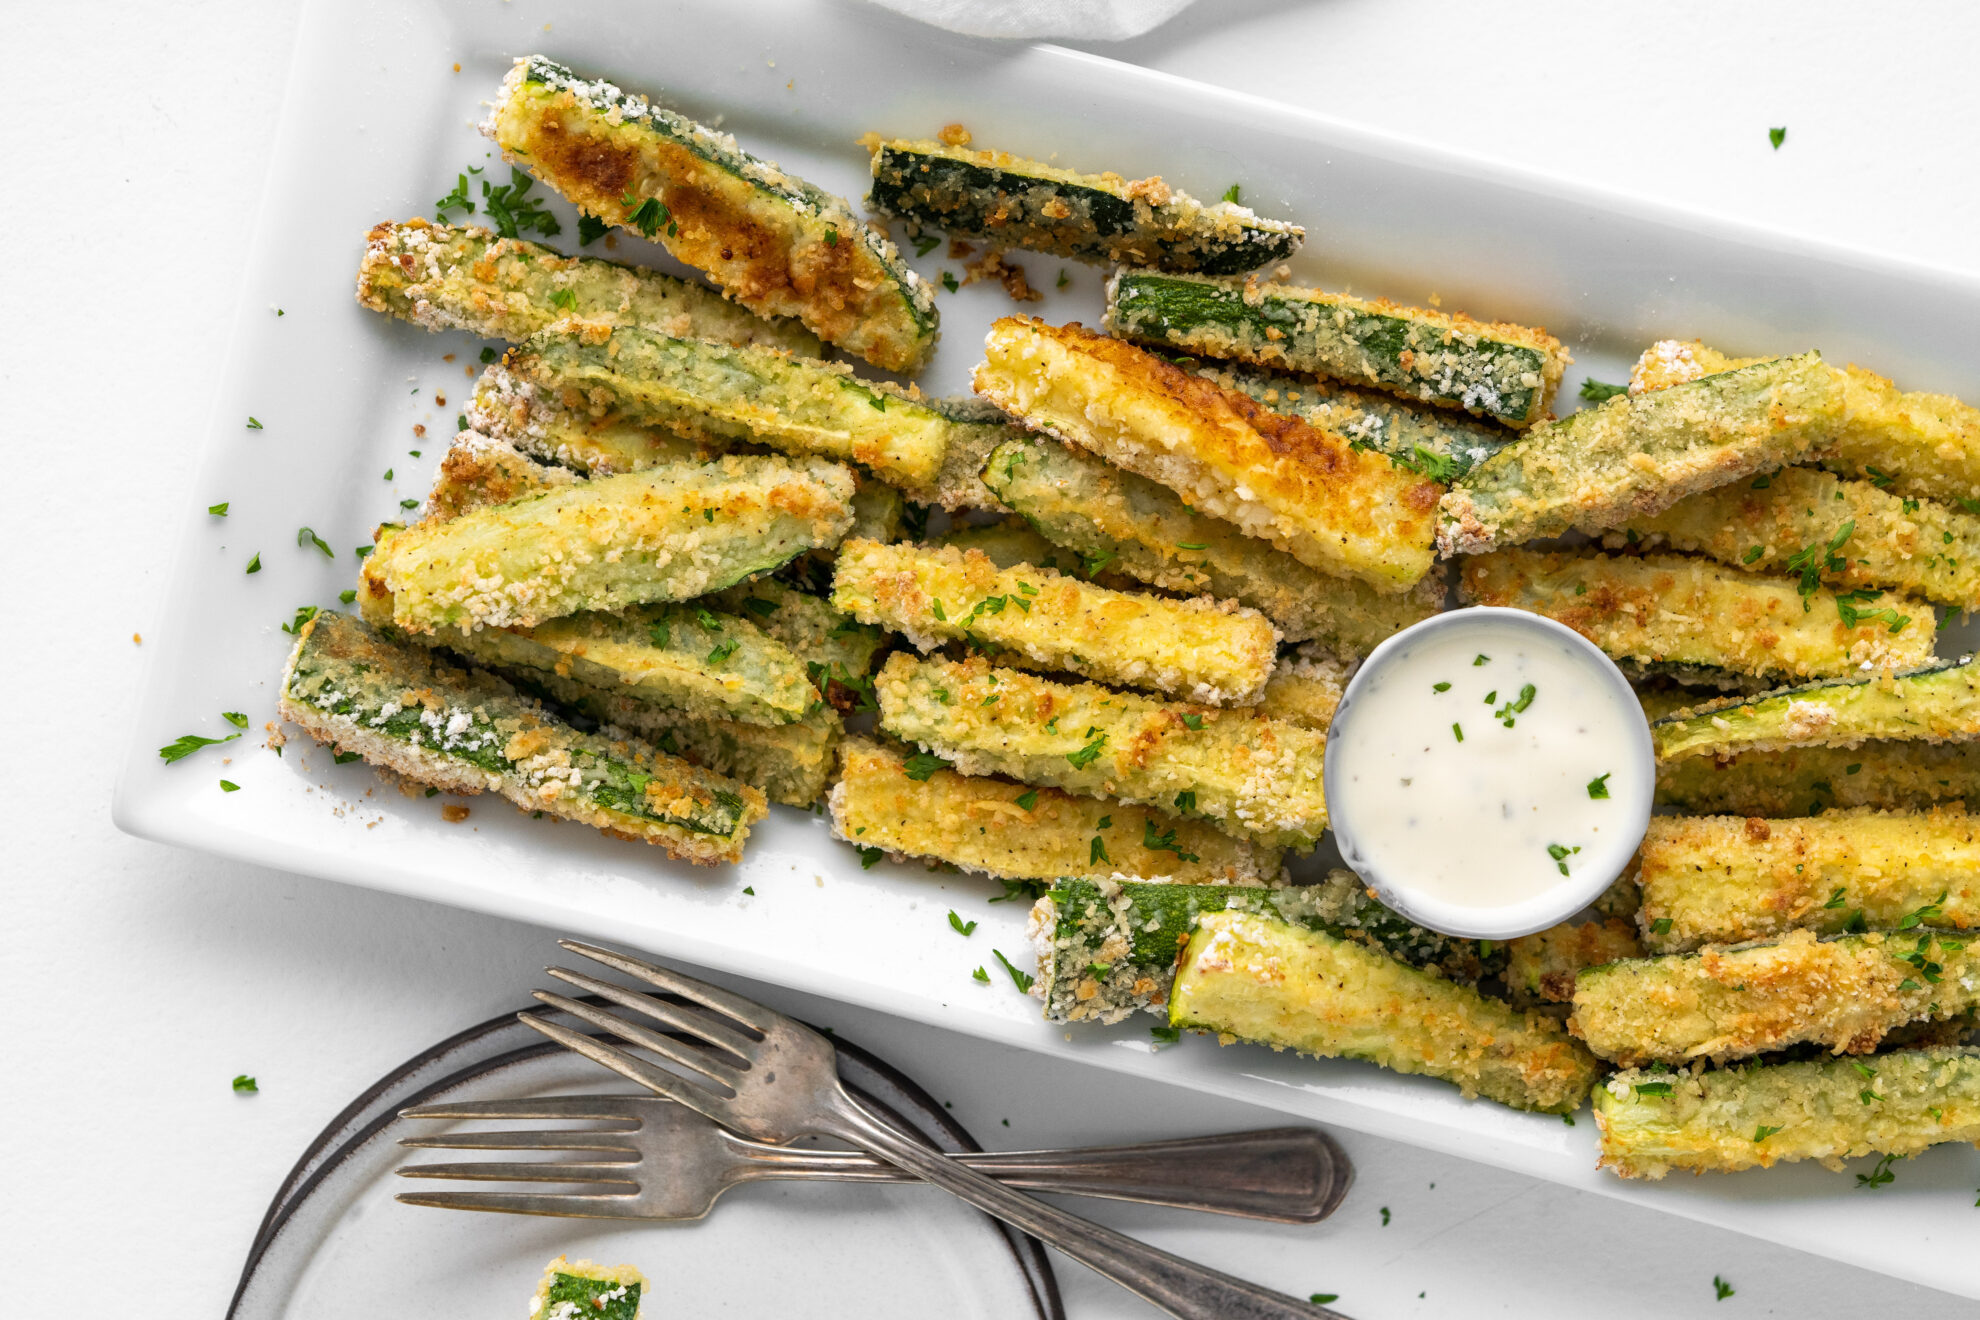 Zucchini fries on a white plate